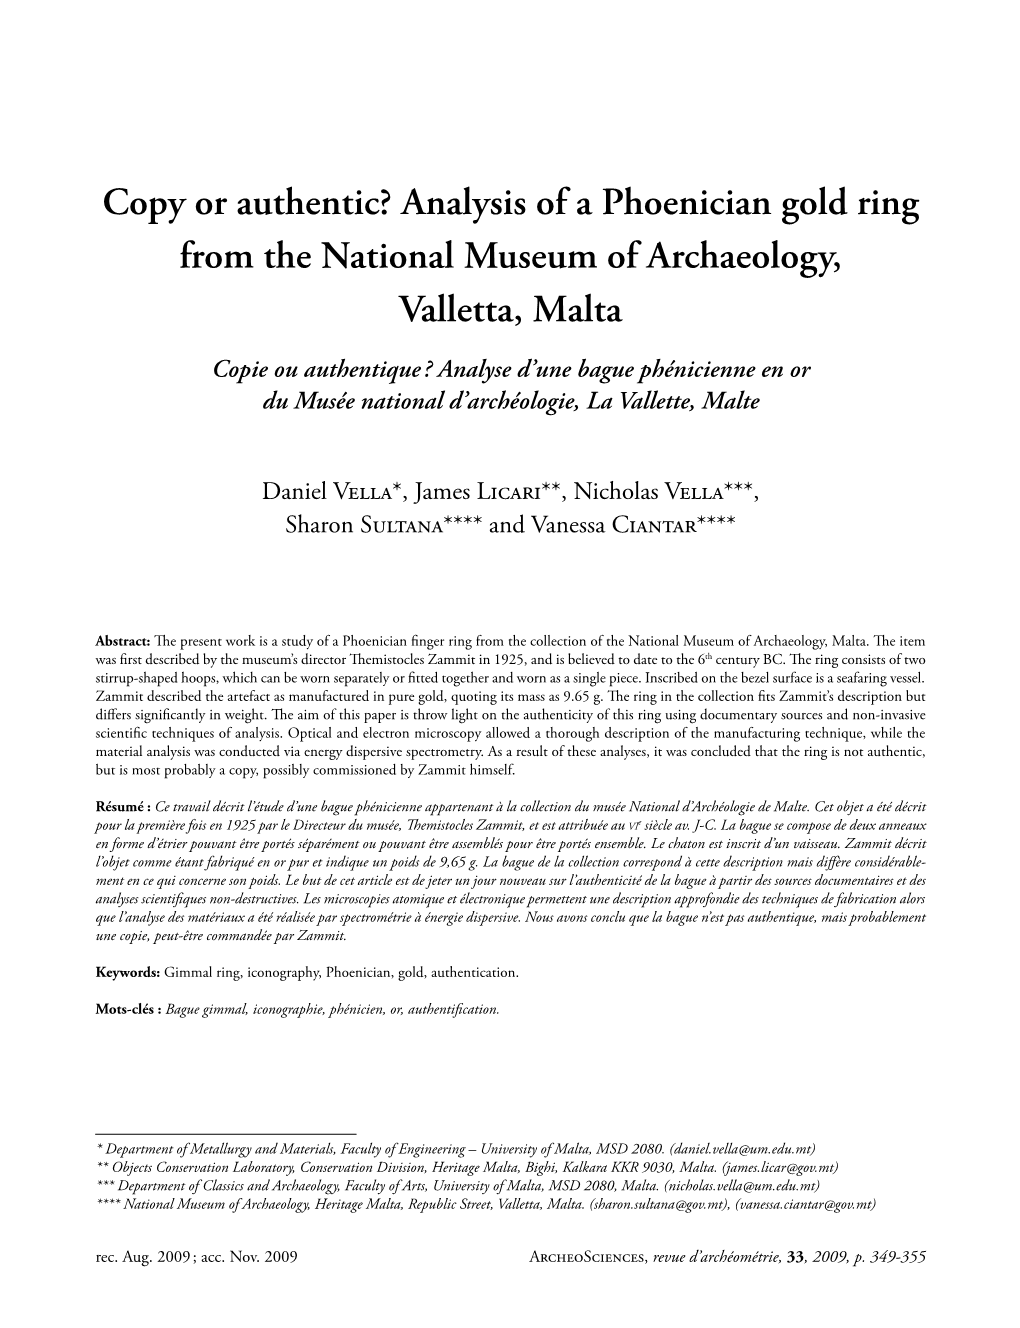 Copy Or Authentic? Analysis of a Phoenician Gold Ring from the National Museum of Archaeology, Valletta, Malta